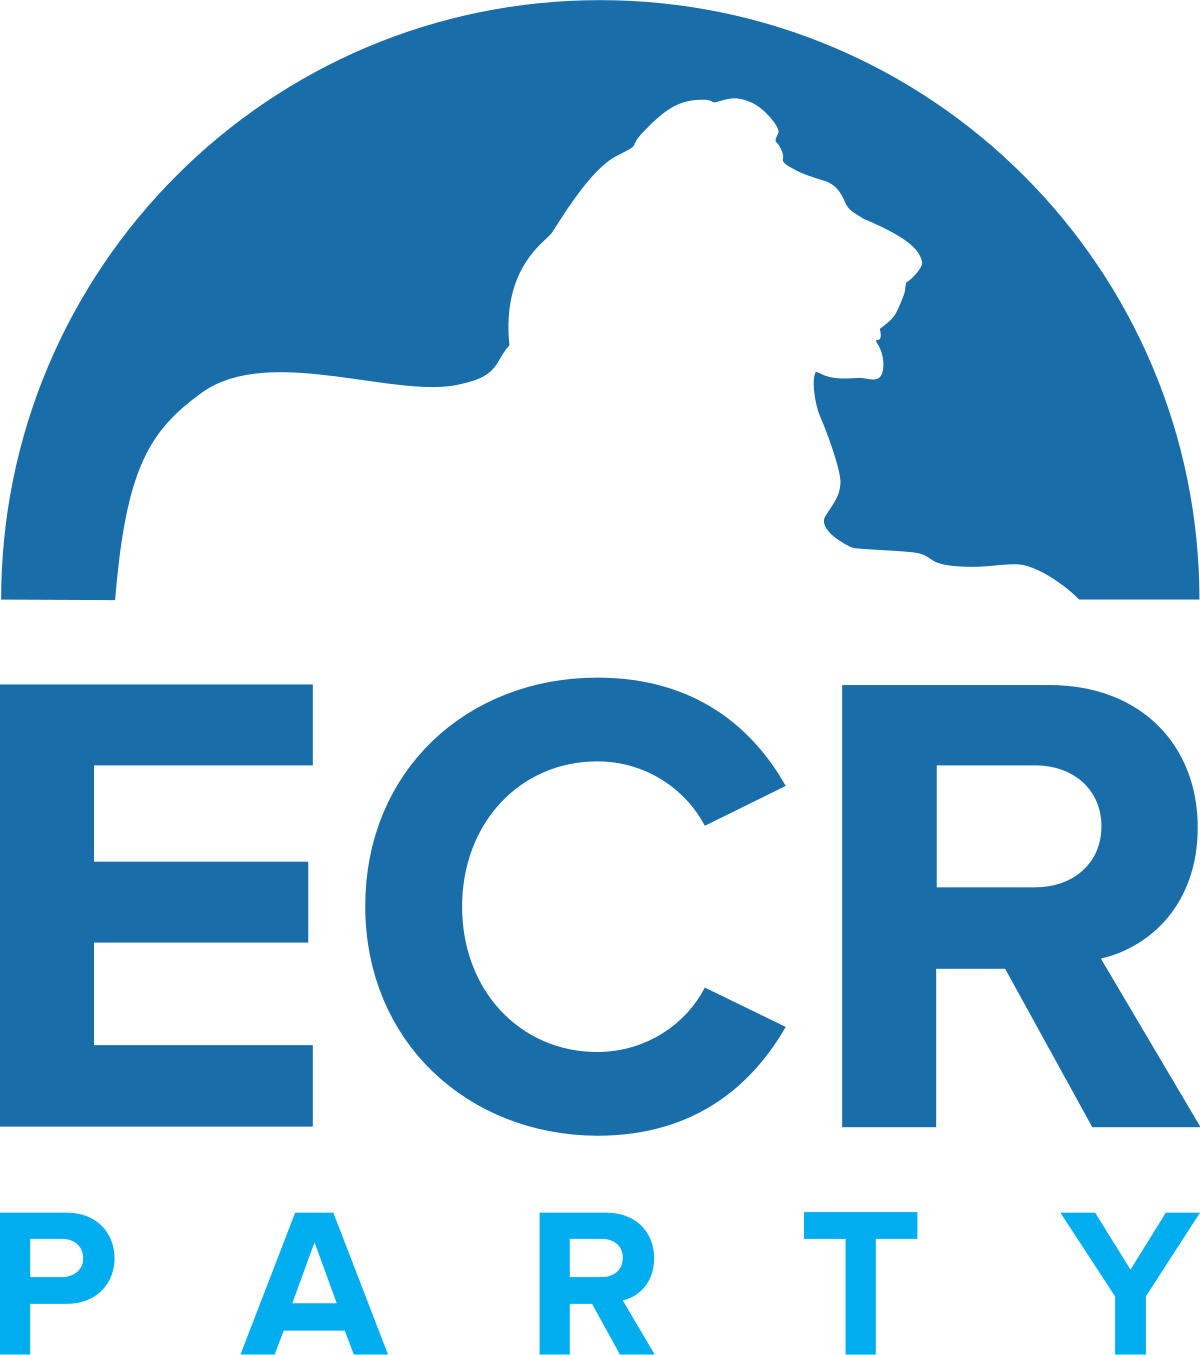 European Conservatives and Reformists Party